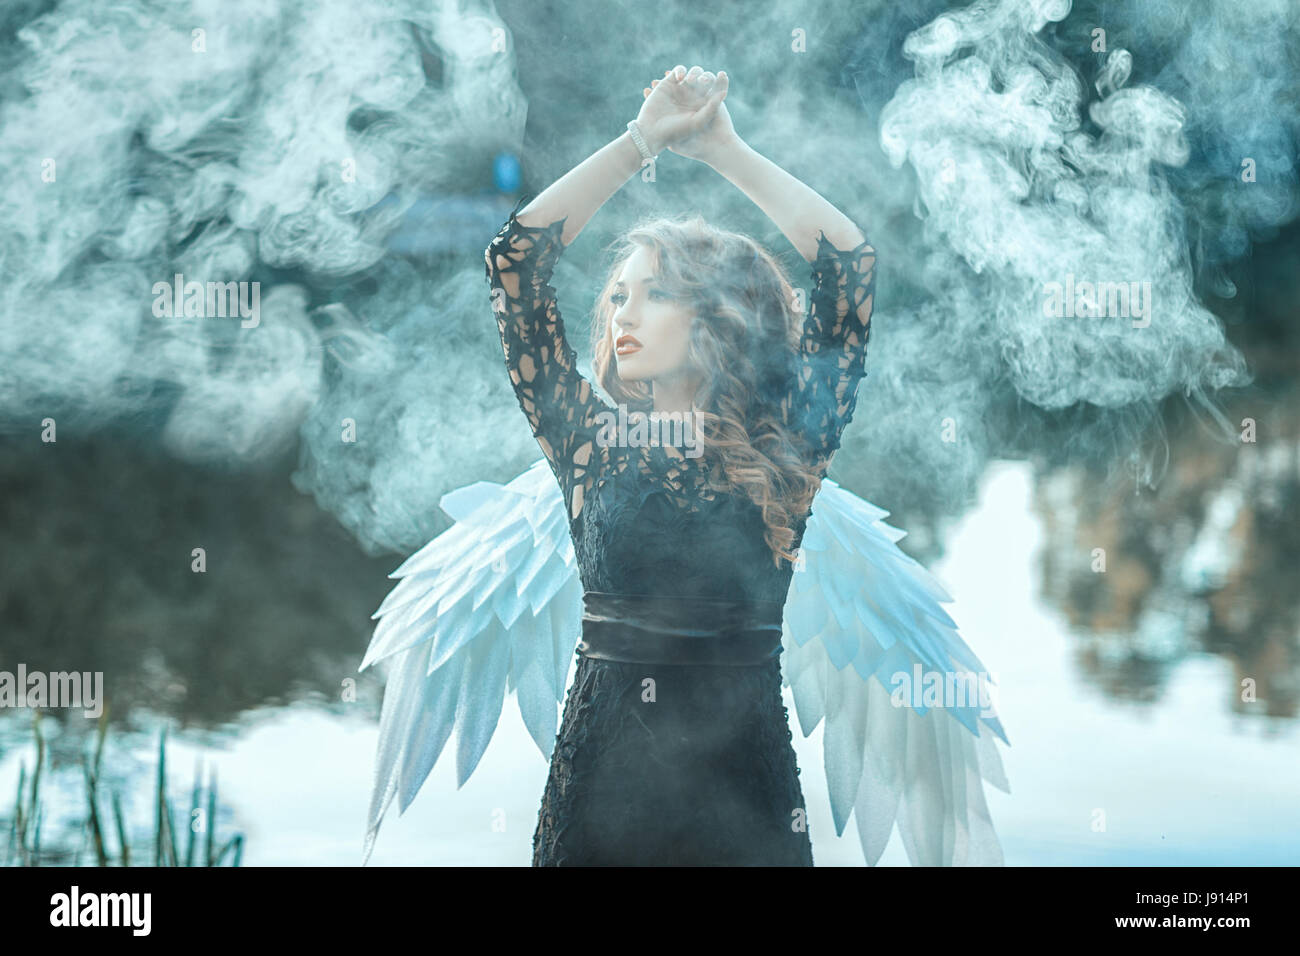 Girl with angel wings is shrouded in smoke. This occurs in the open air on a river. Stock Photo